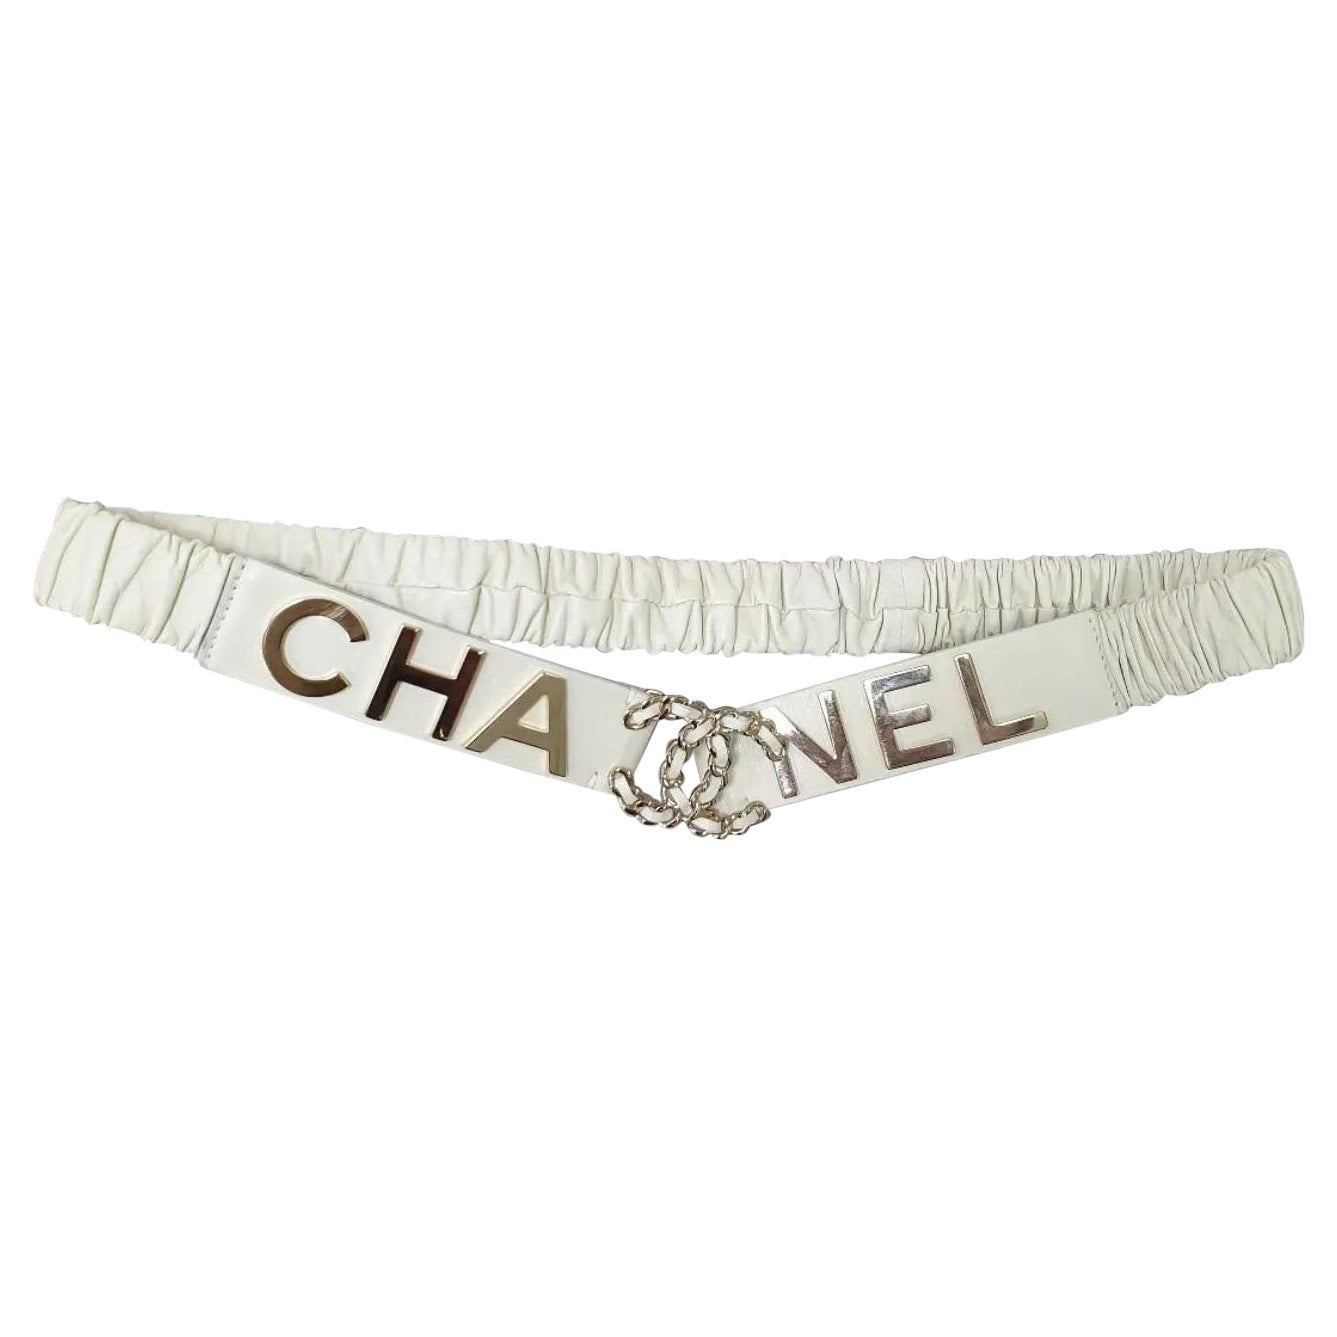 Chanel White Ruched Leather Belt